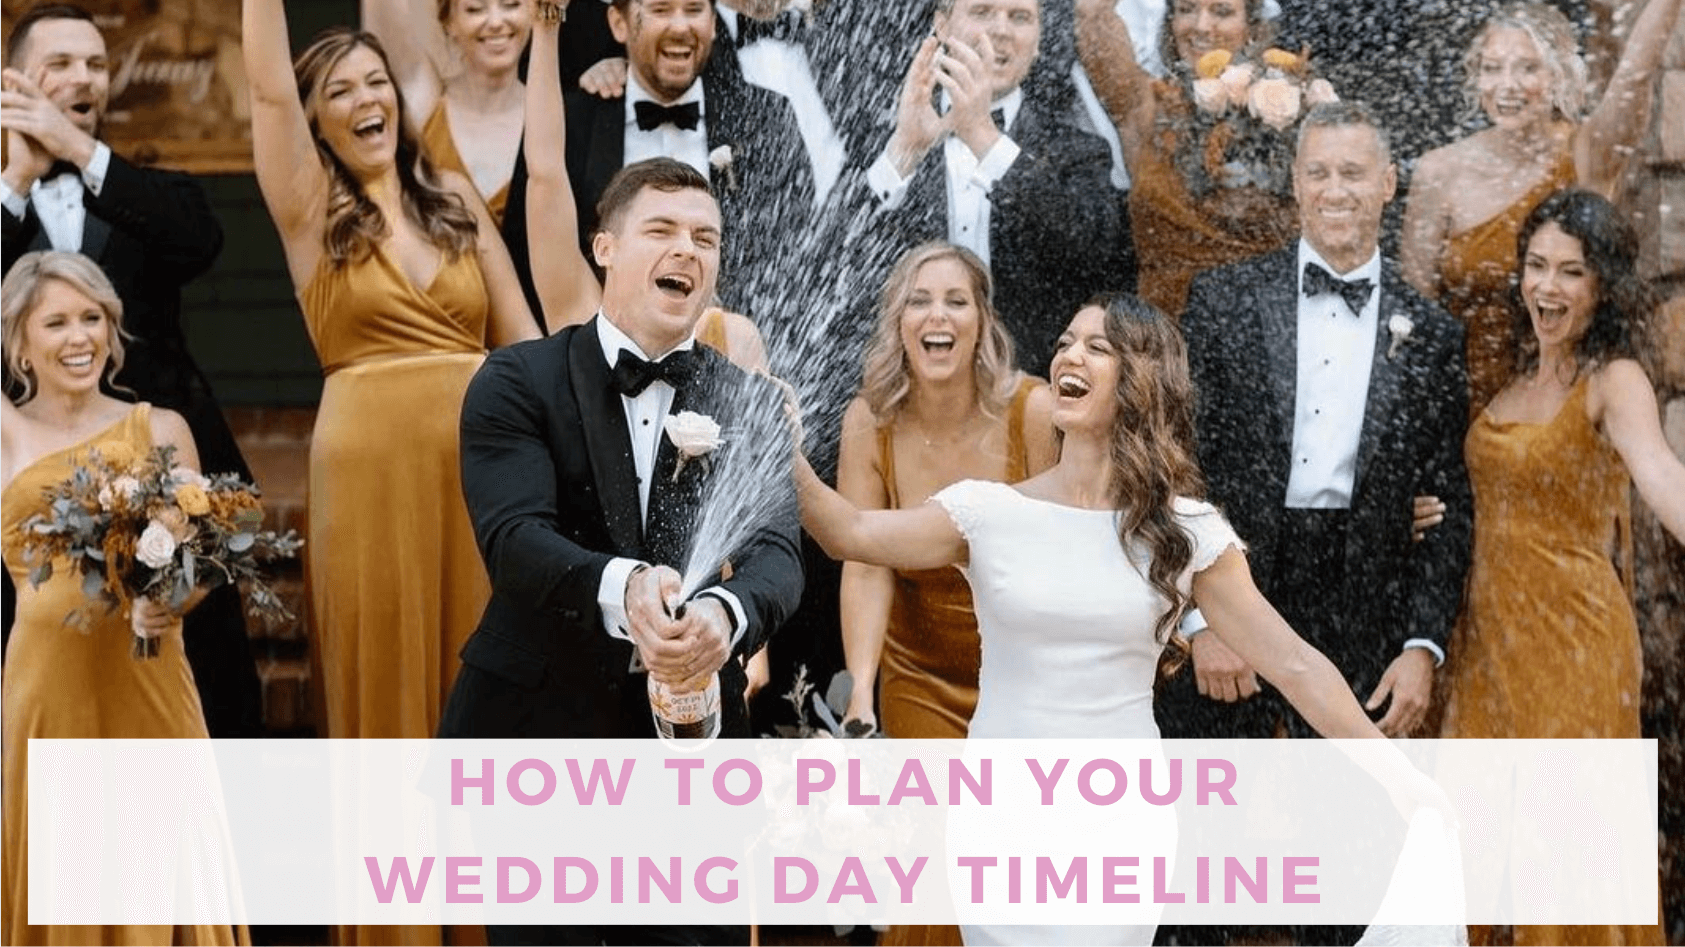 Wedding Song Checklist: How Many Special Songs Do You Need?